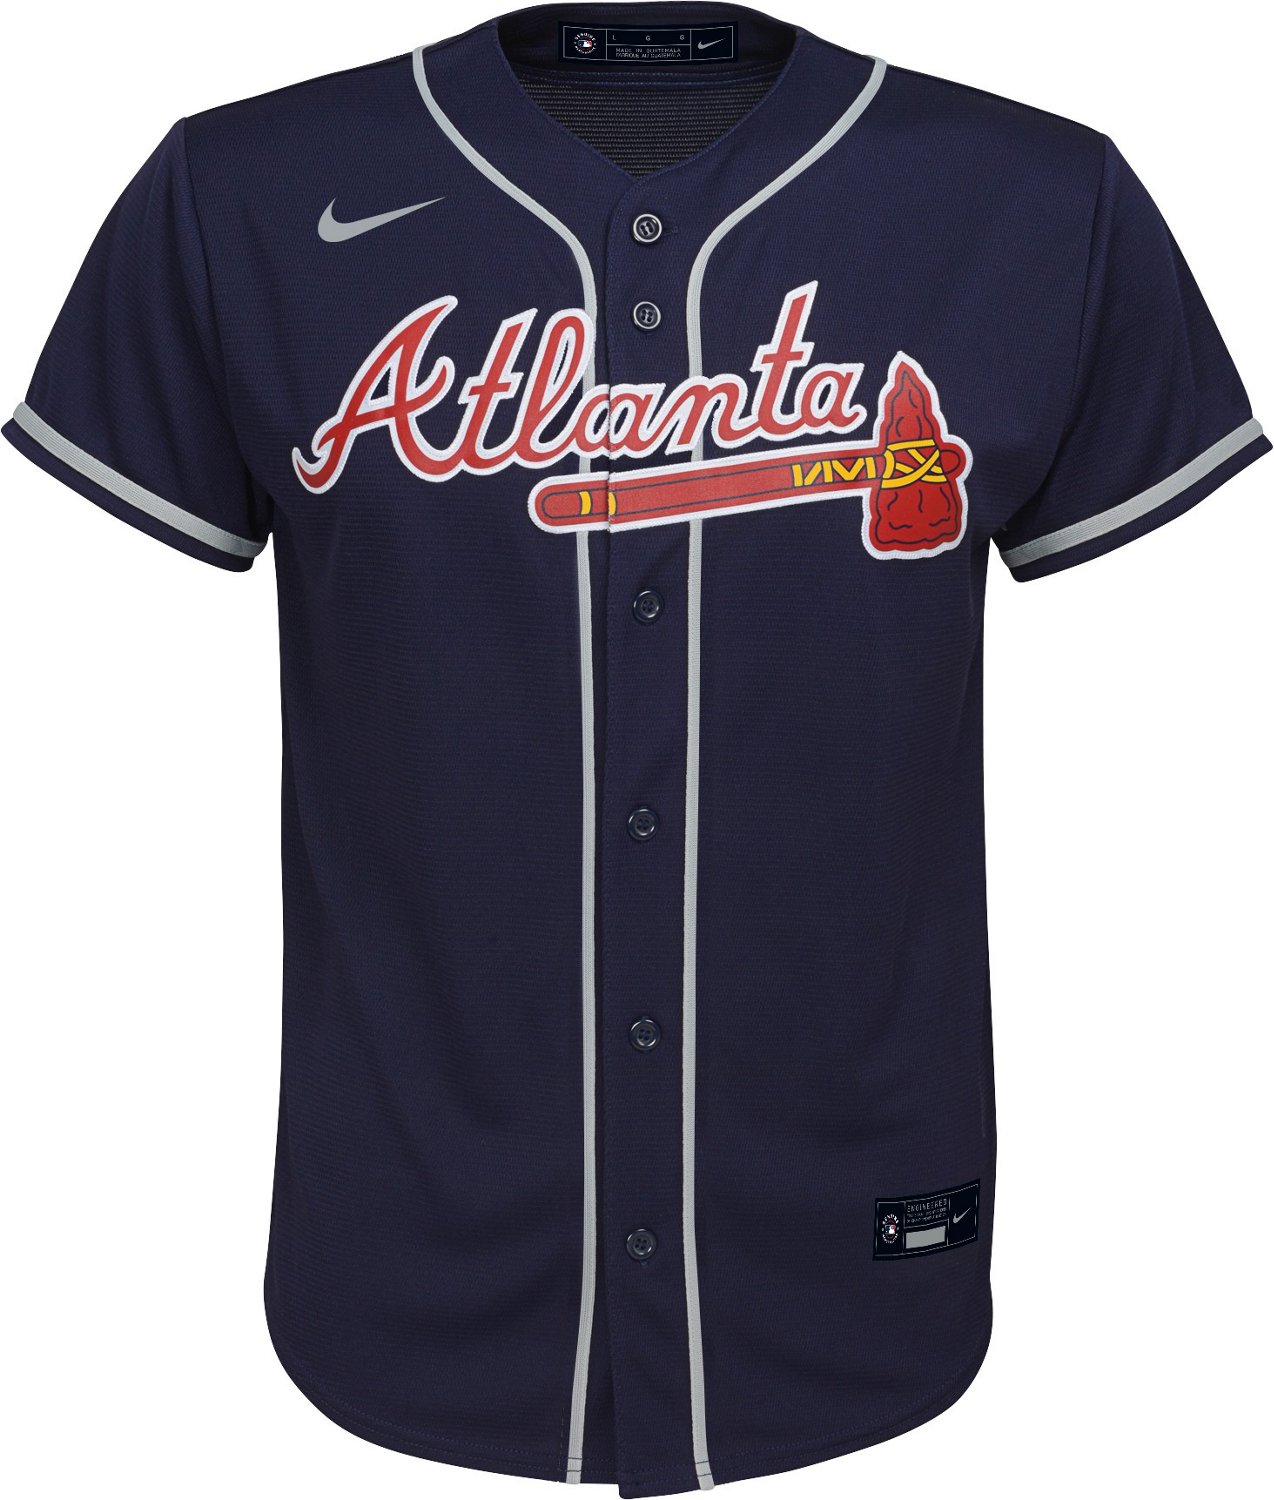 Nike Youth Atlanta Braves Team Replica Finished Jersey Academy